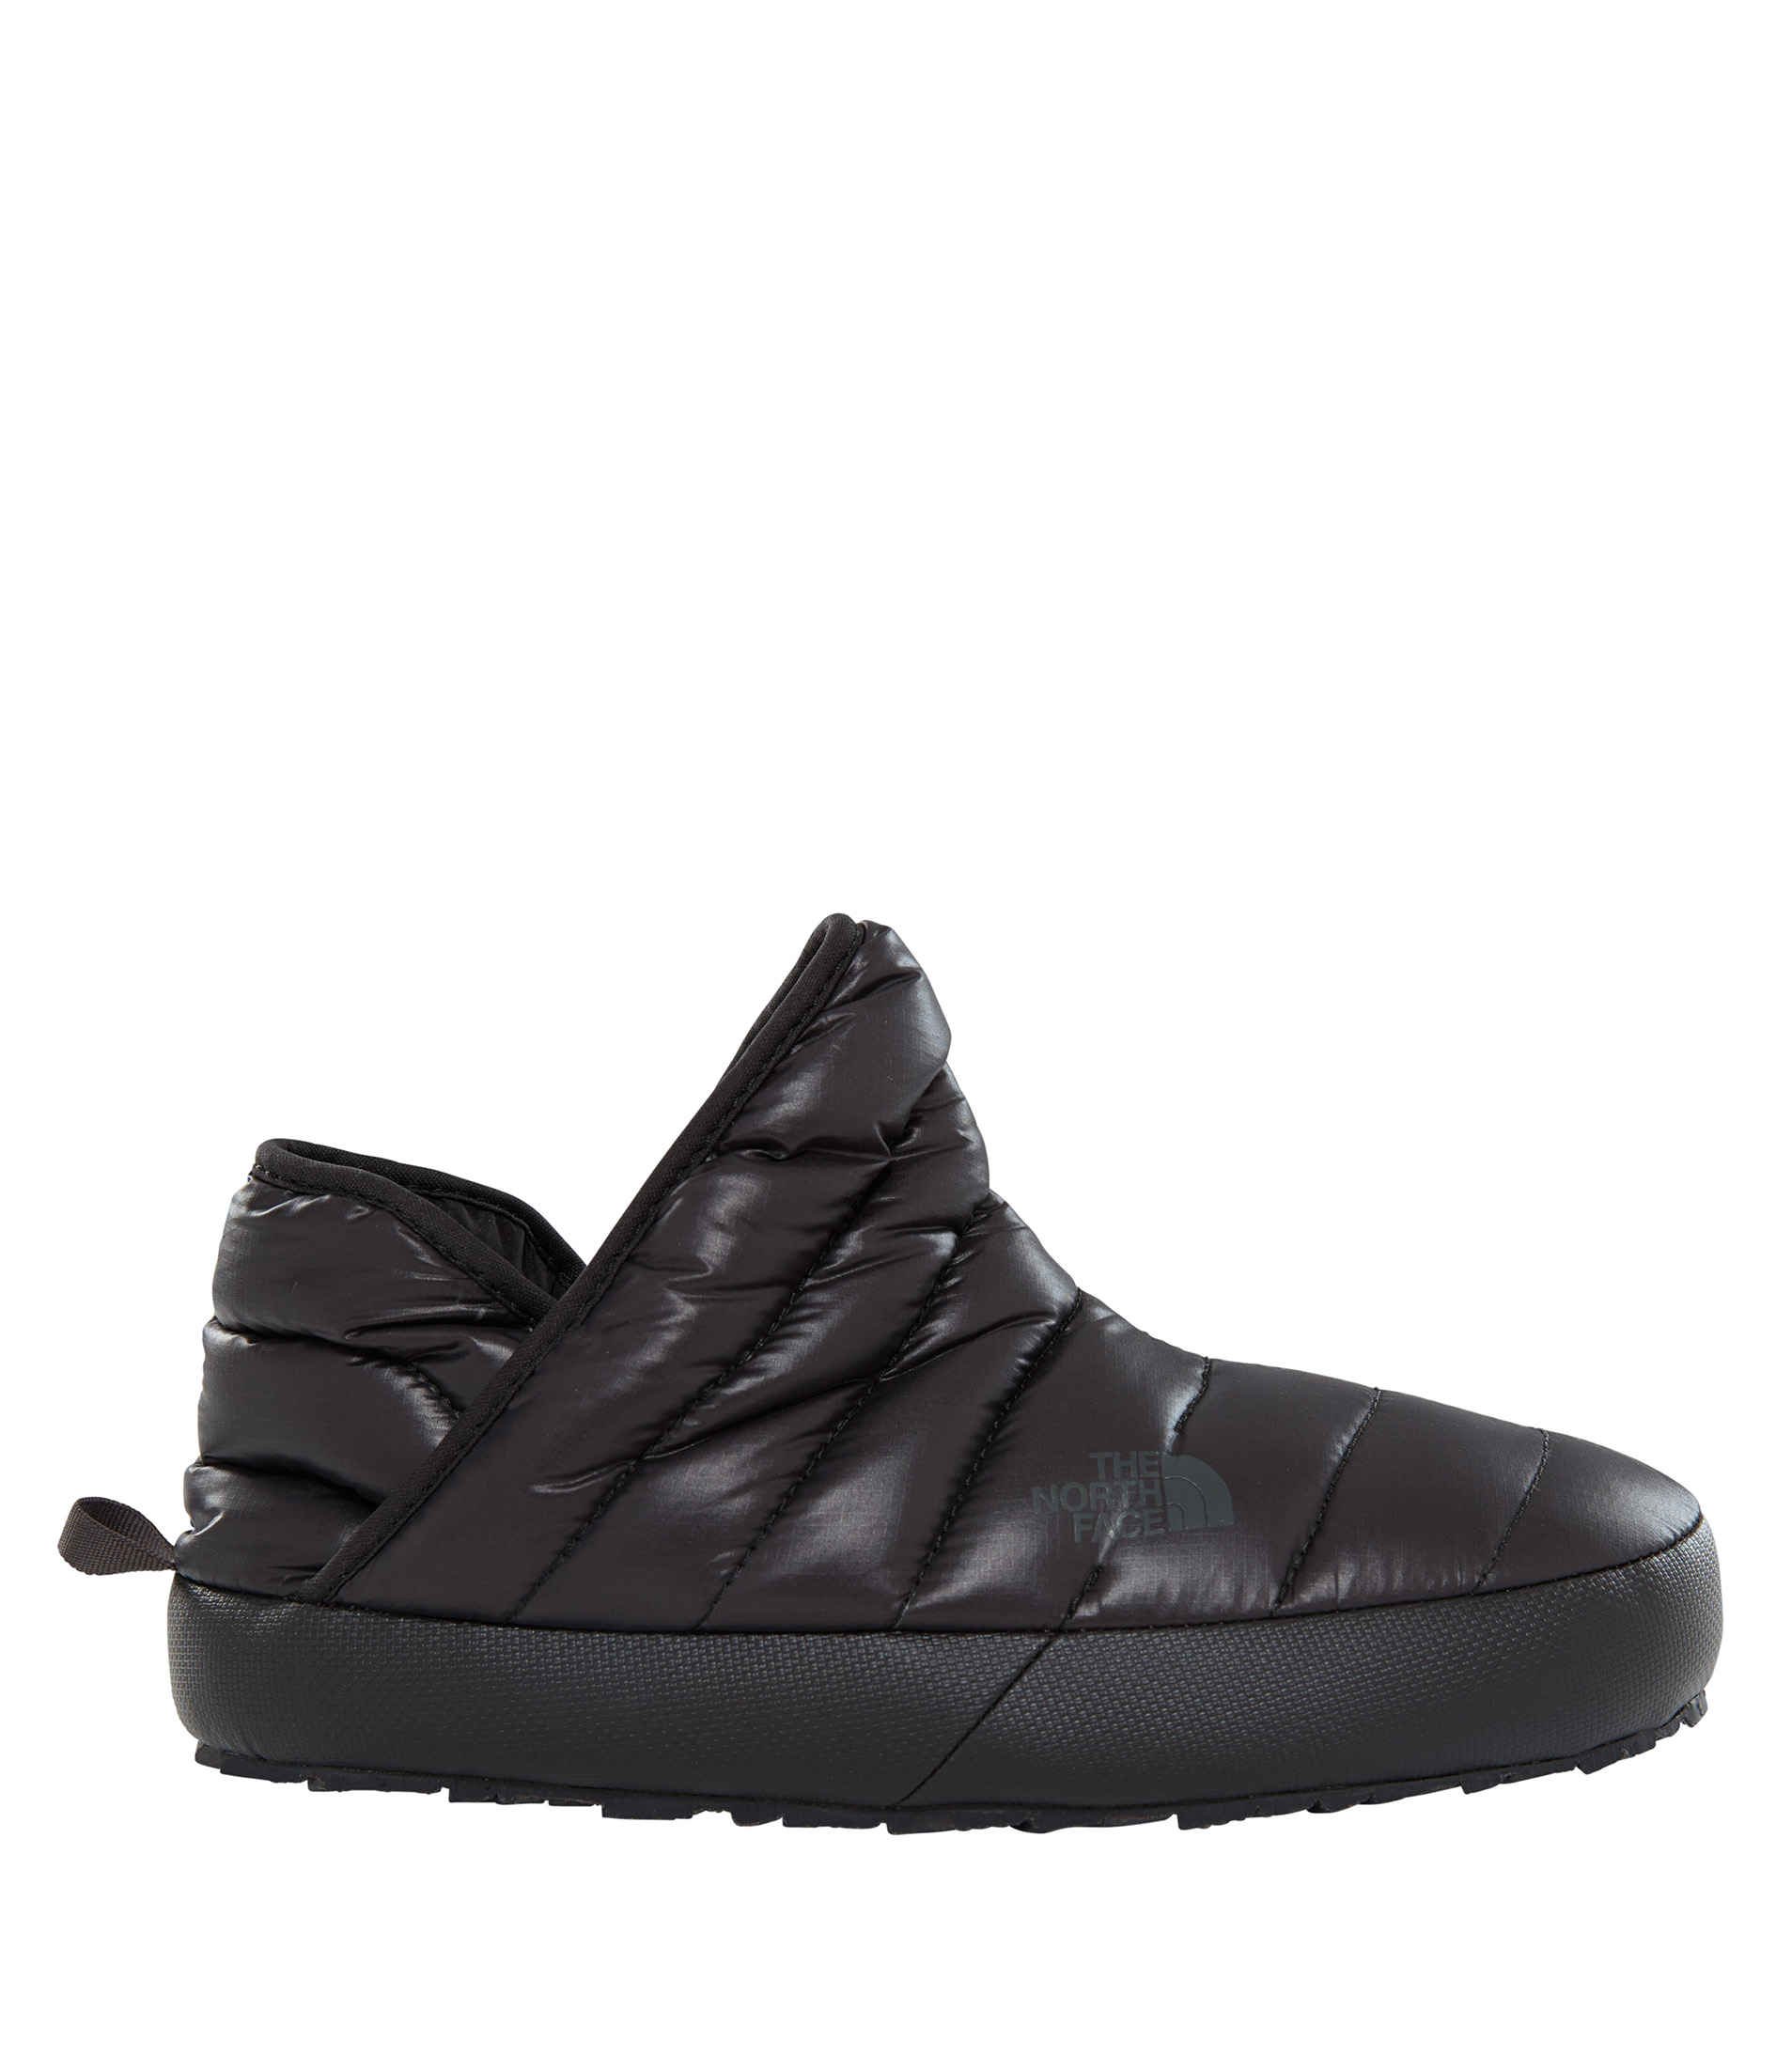 W THERMOBALL TRACTION BOOTIE  TNF BLACK